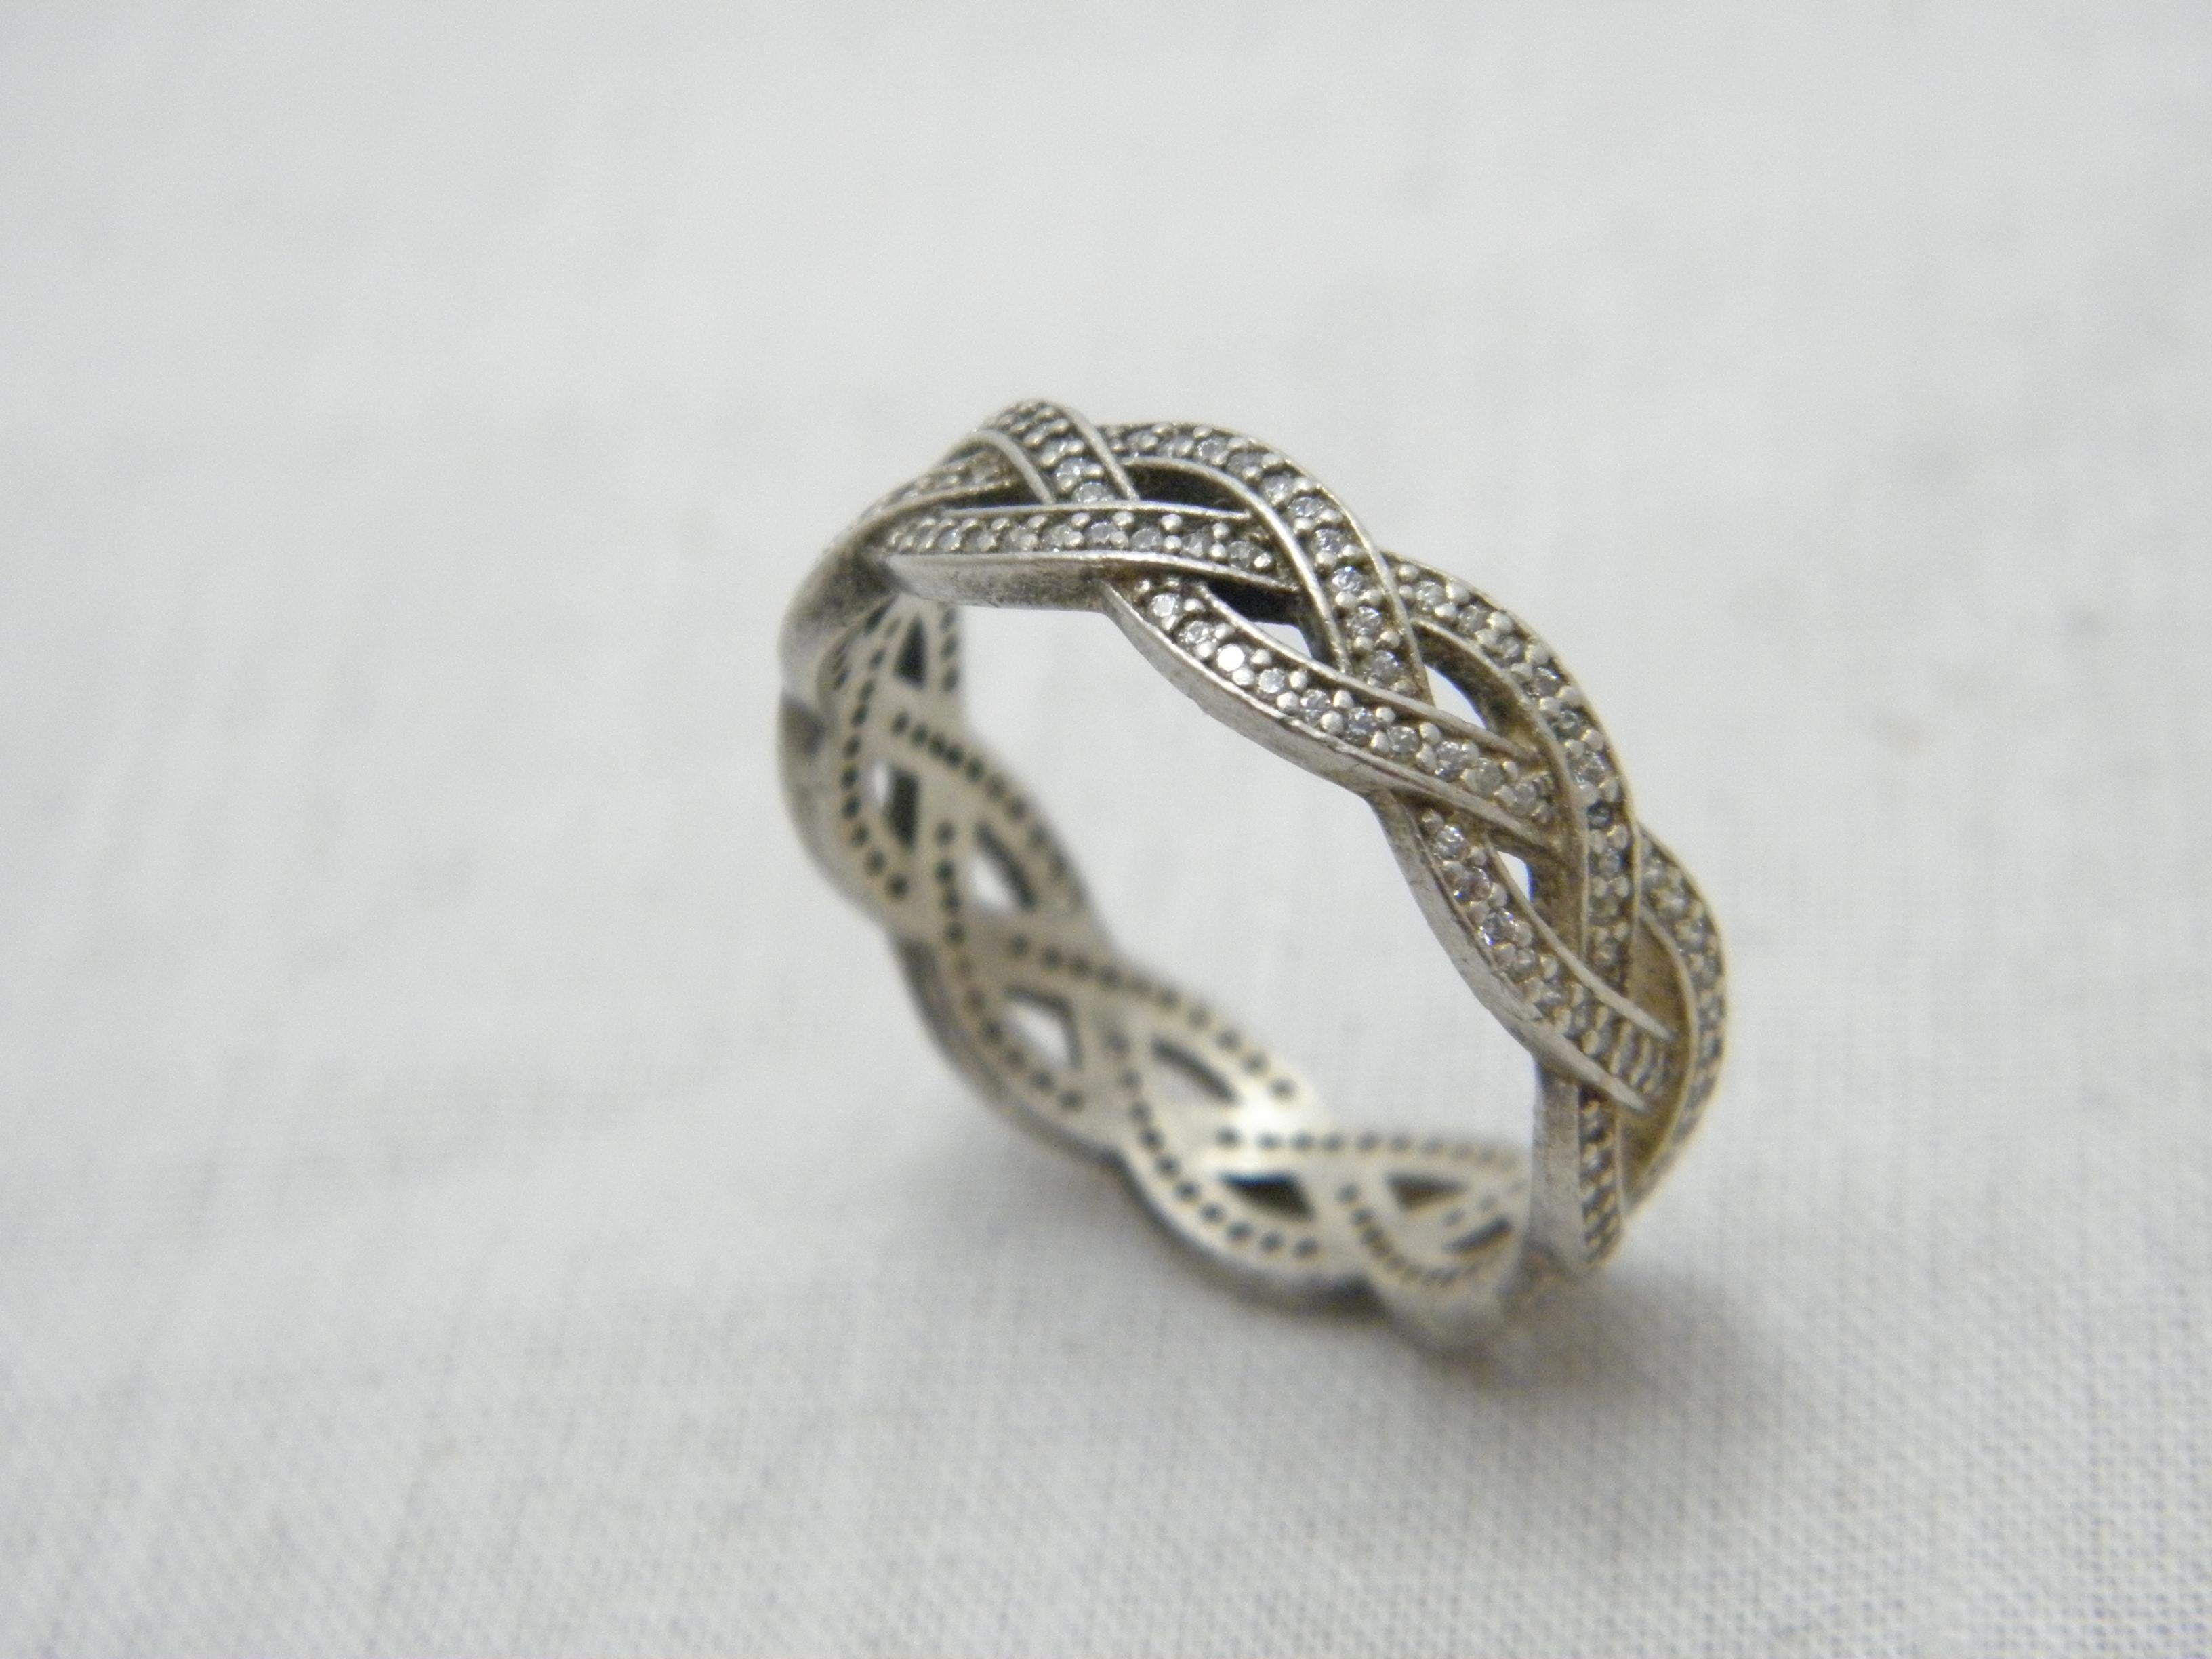 Vintage Palladium Diamond 6mm Celtic Weave Ring Size S 9.25 950 Purity Band In Good Condition For Sale In Camelford, GB